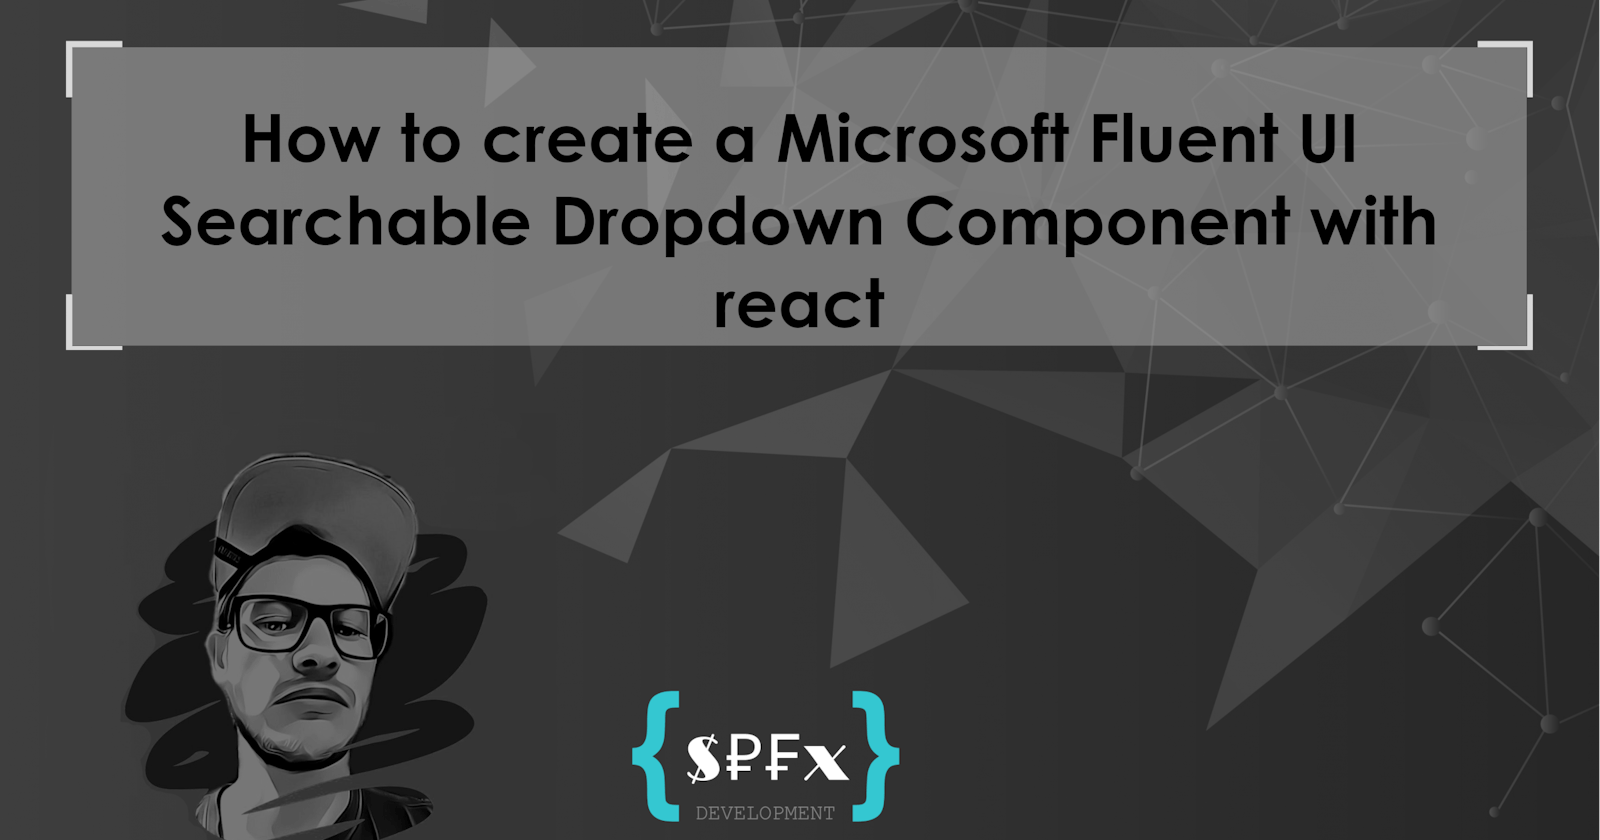 How to create a Microsoft Fluent UI Searchable Dropdown Component with react